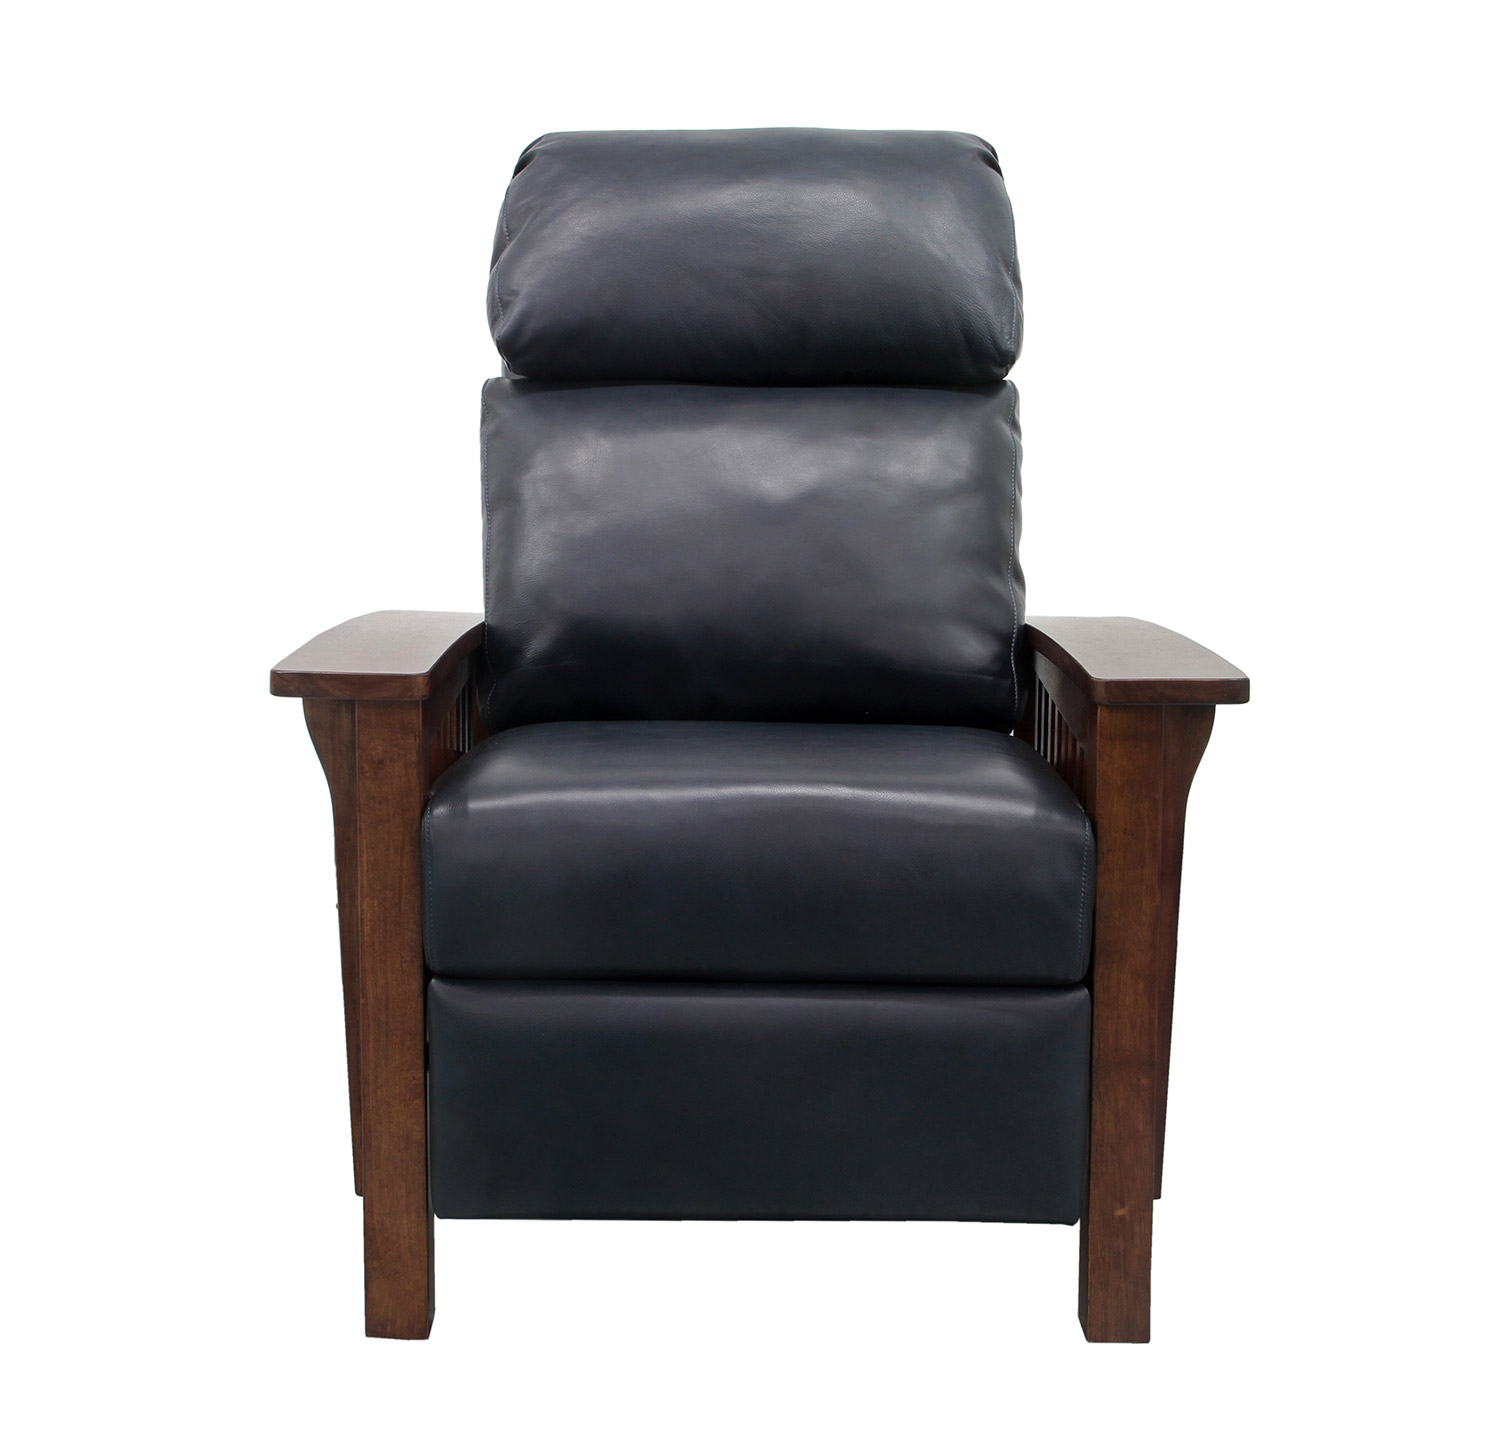 Barcalounger Mission Recliner Chair - Shoreham Blue/All Leather